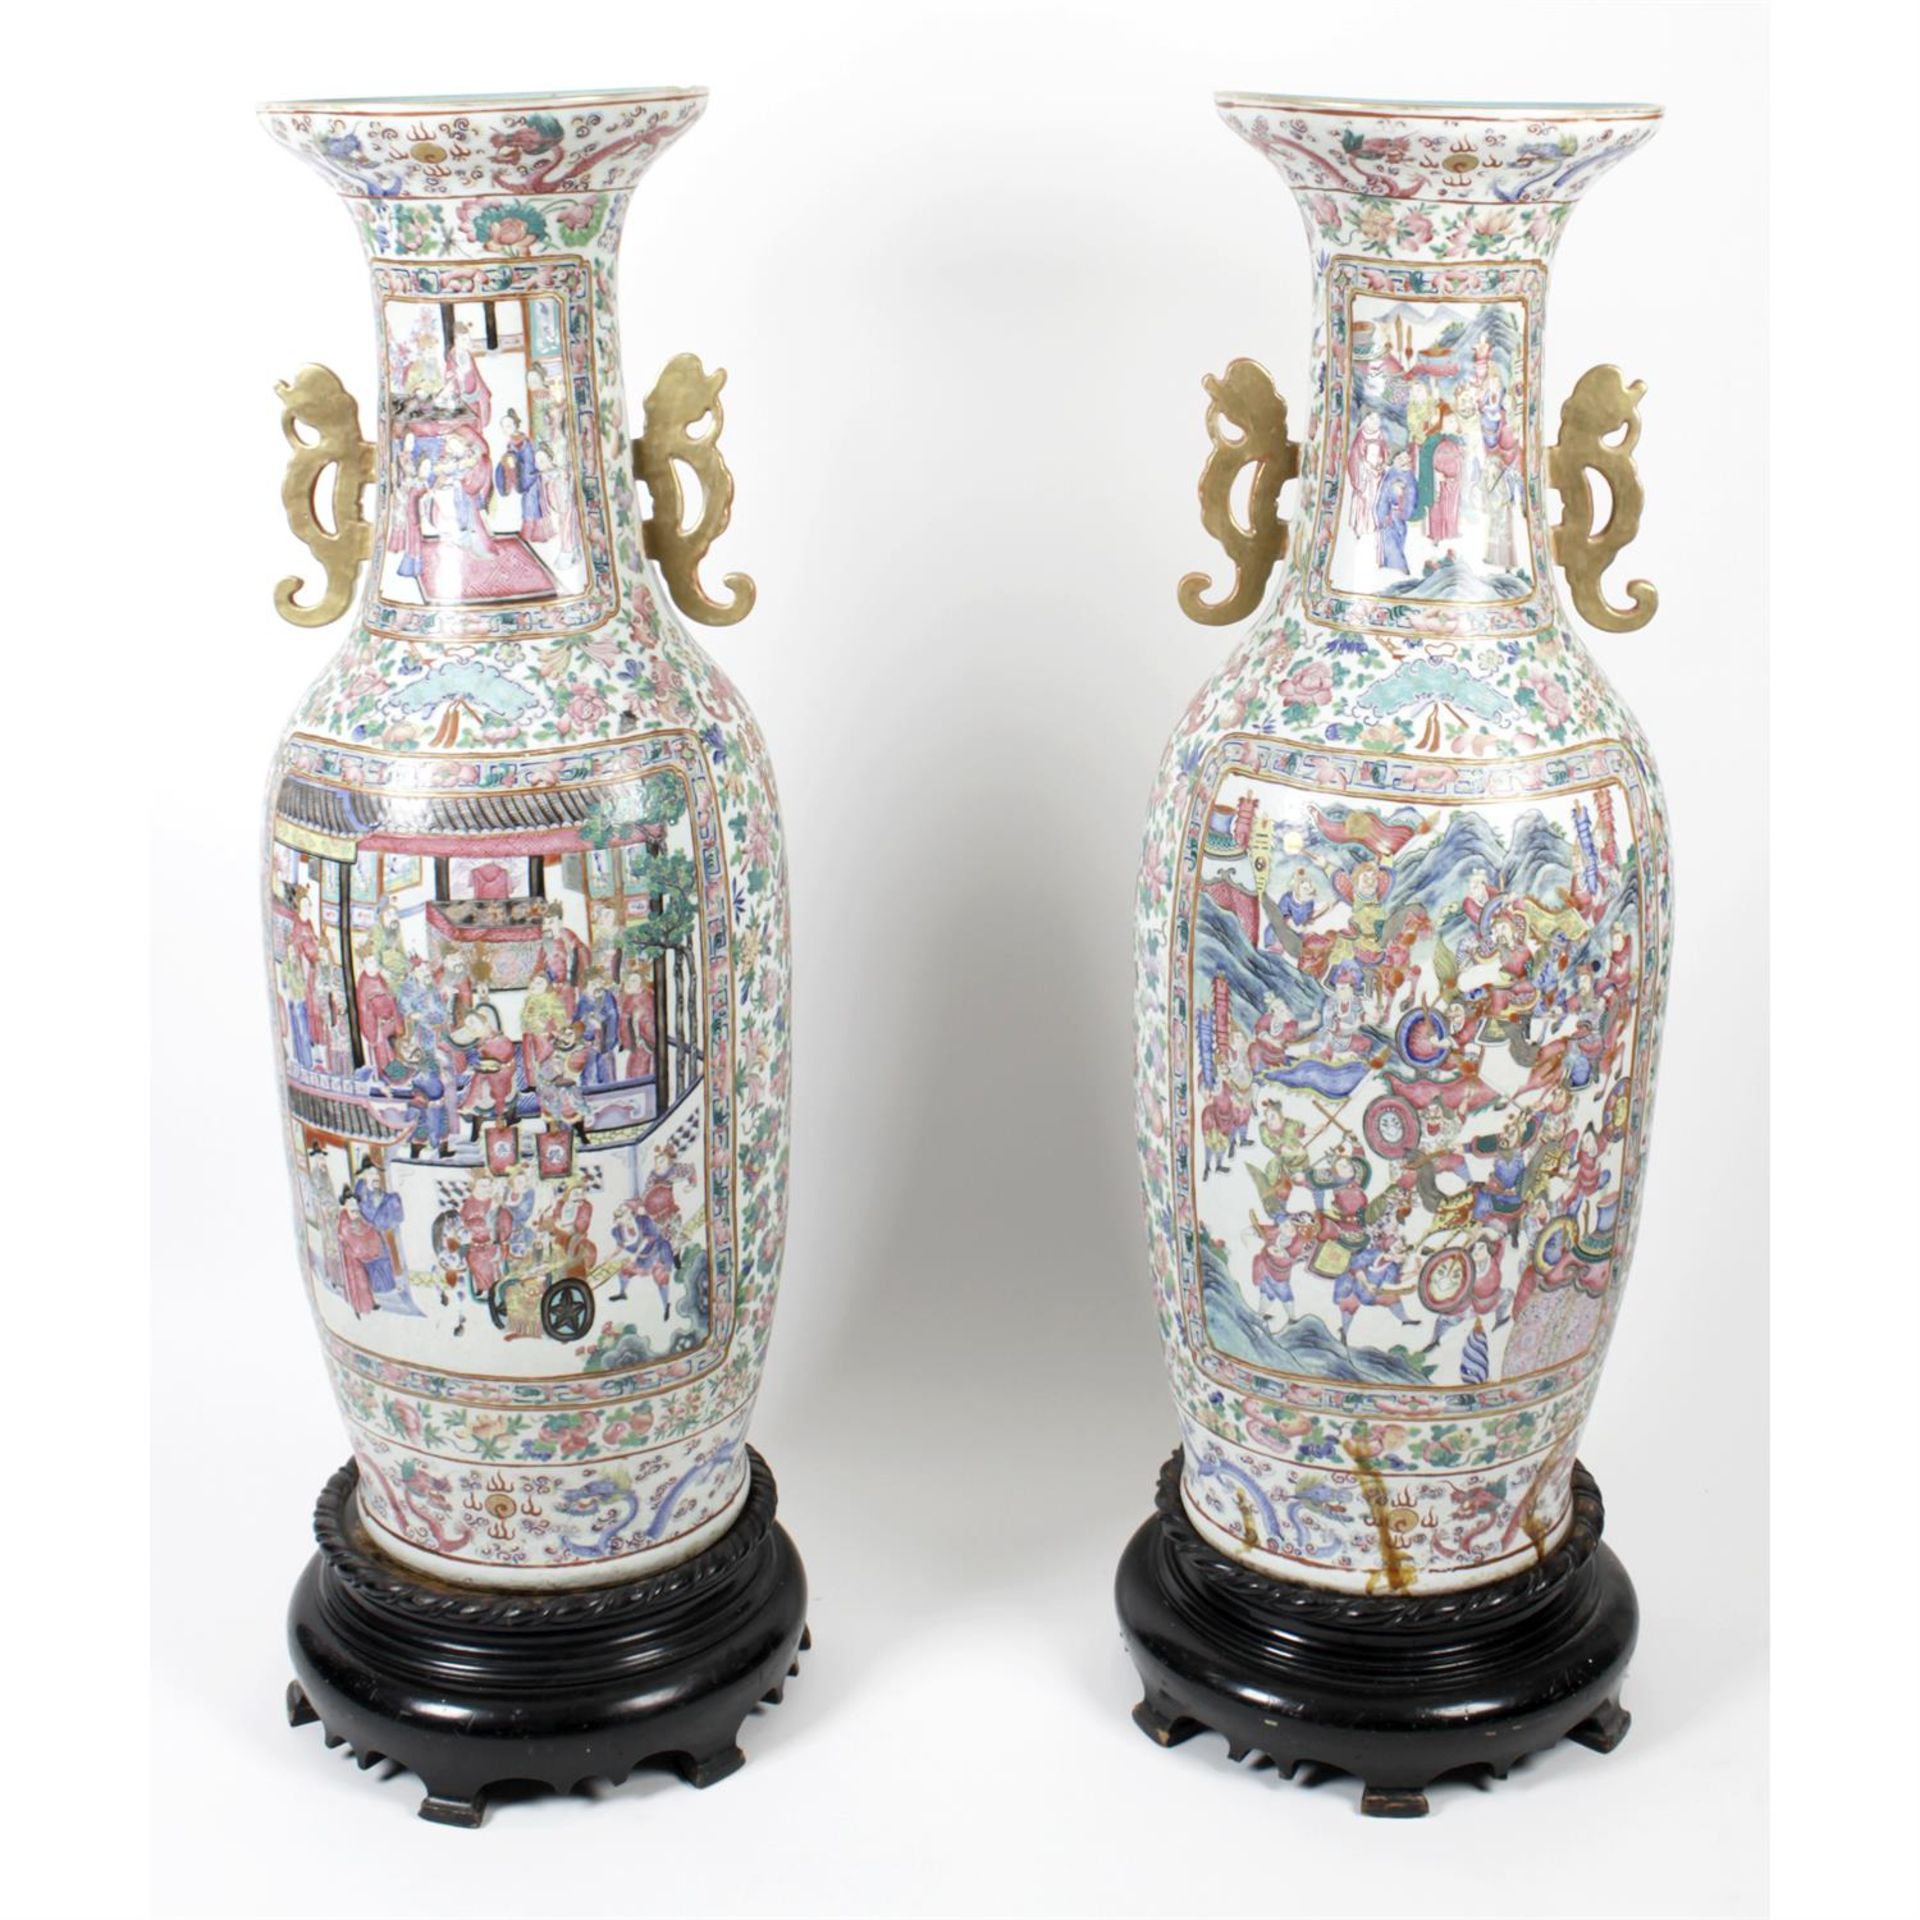 A pair of impressive, large mid-19th century Cantonese porcelain vases. - Image 3 of 20